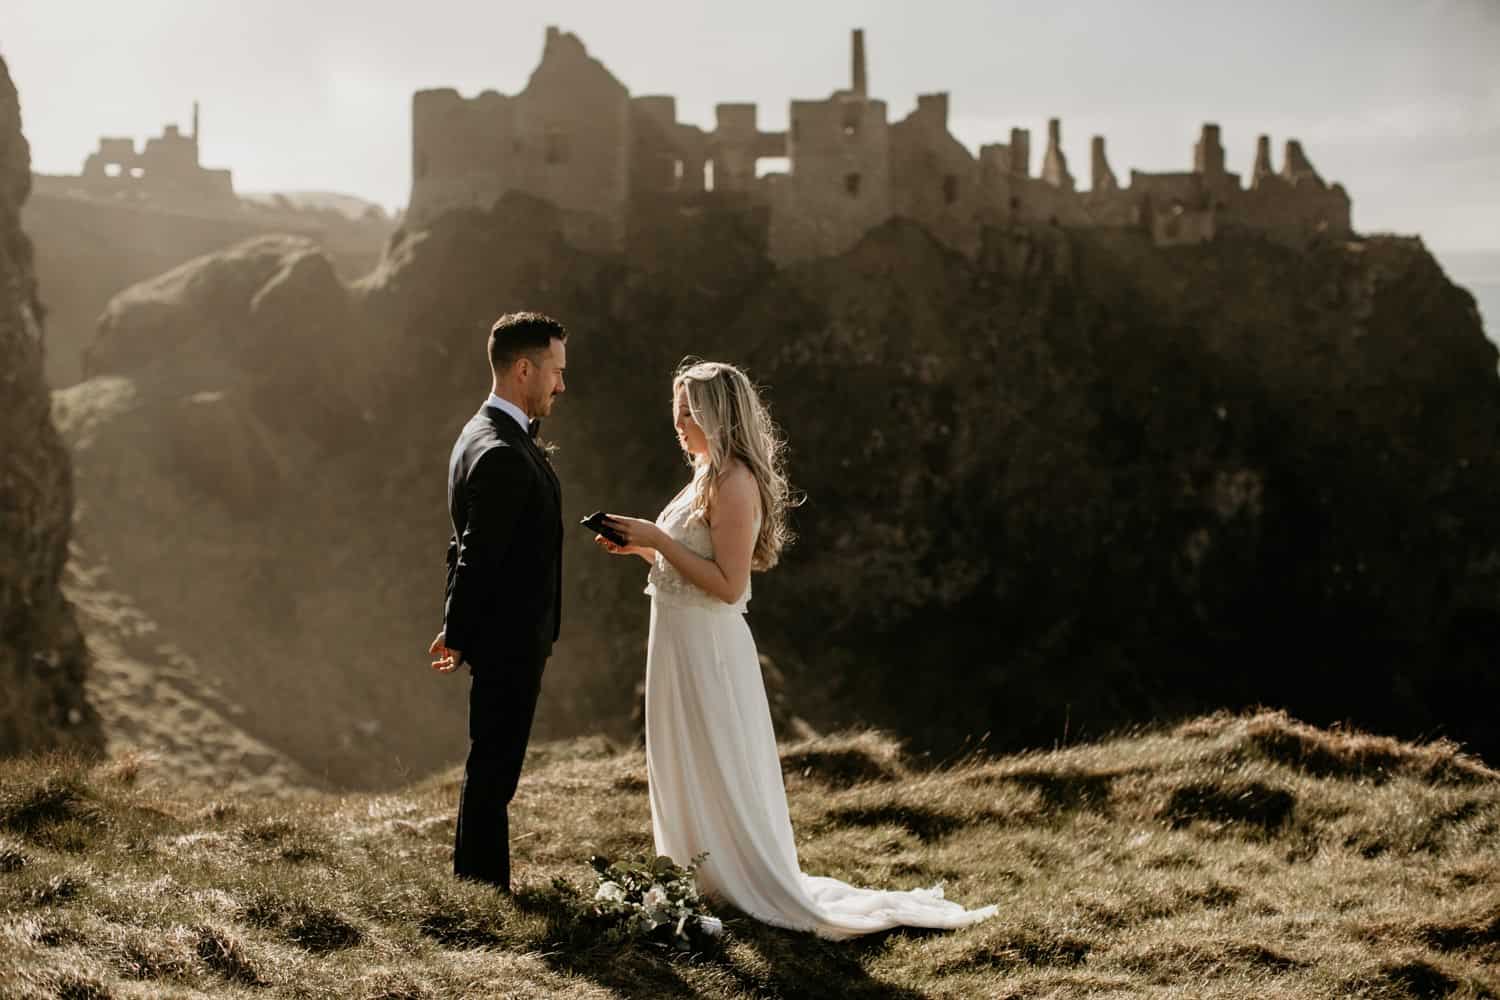 A guide to Intimate weddings and Elopements in Ireland 2020